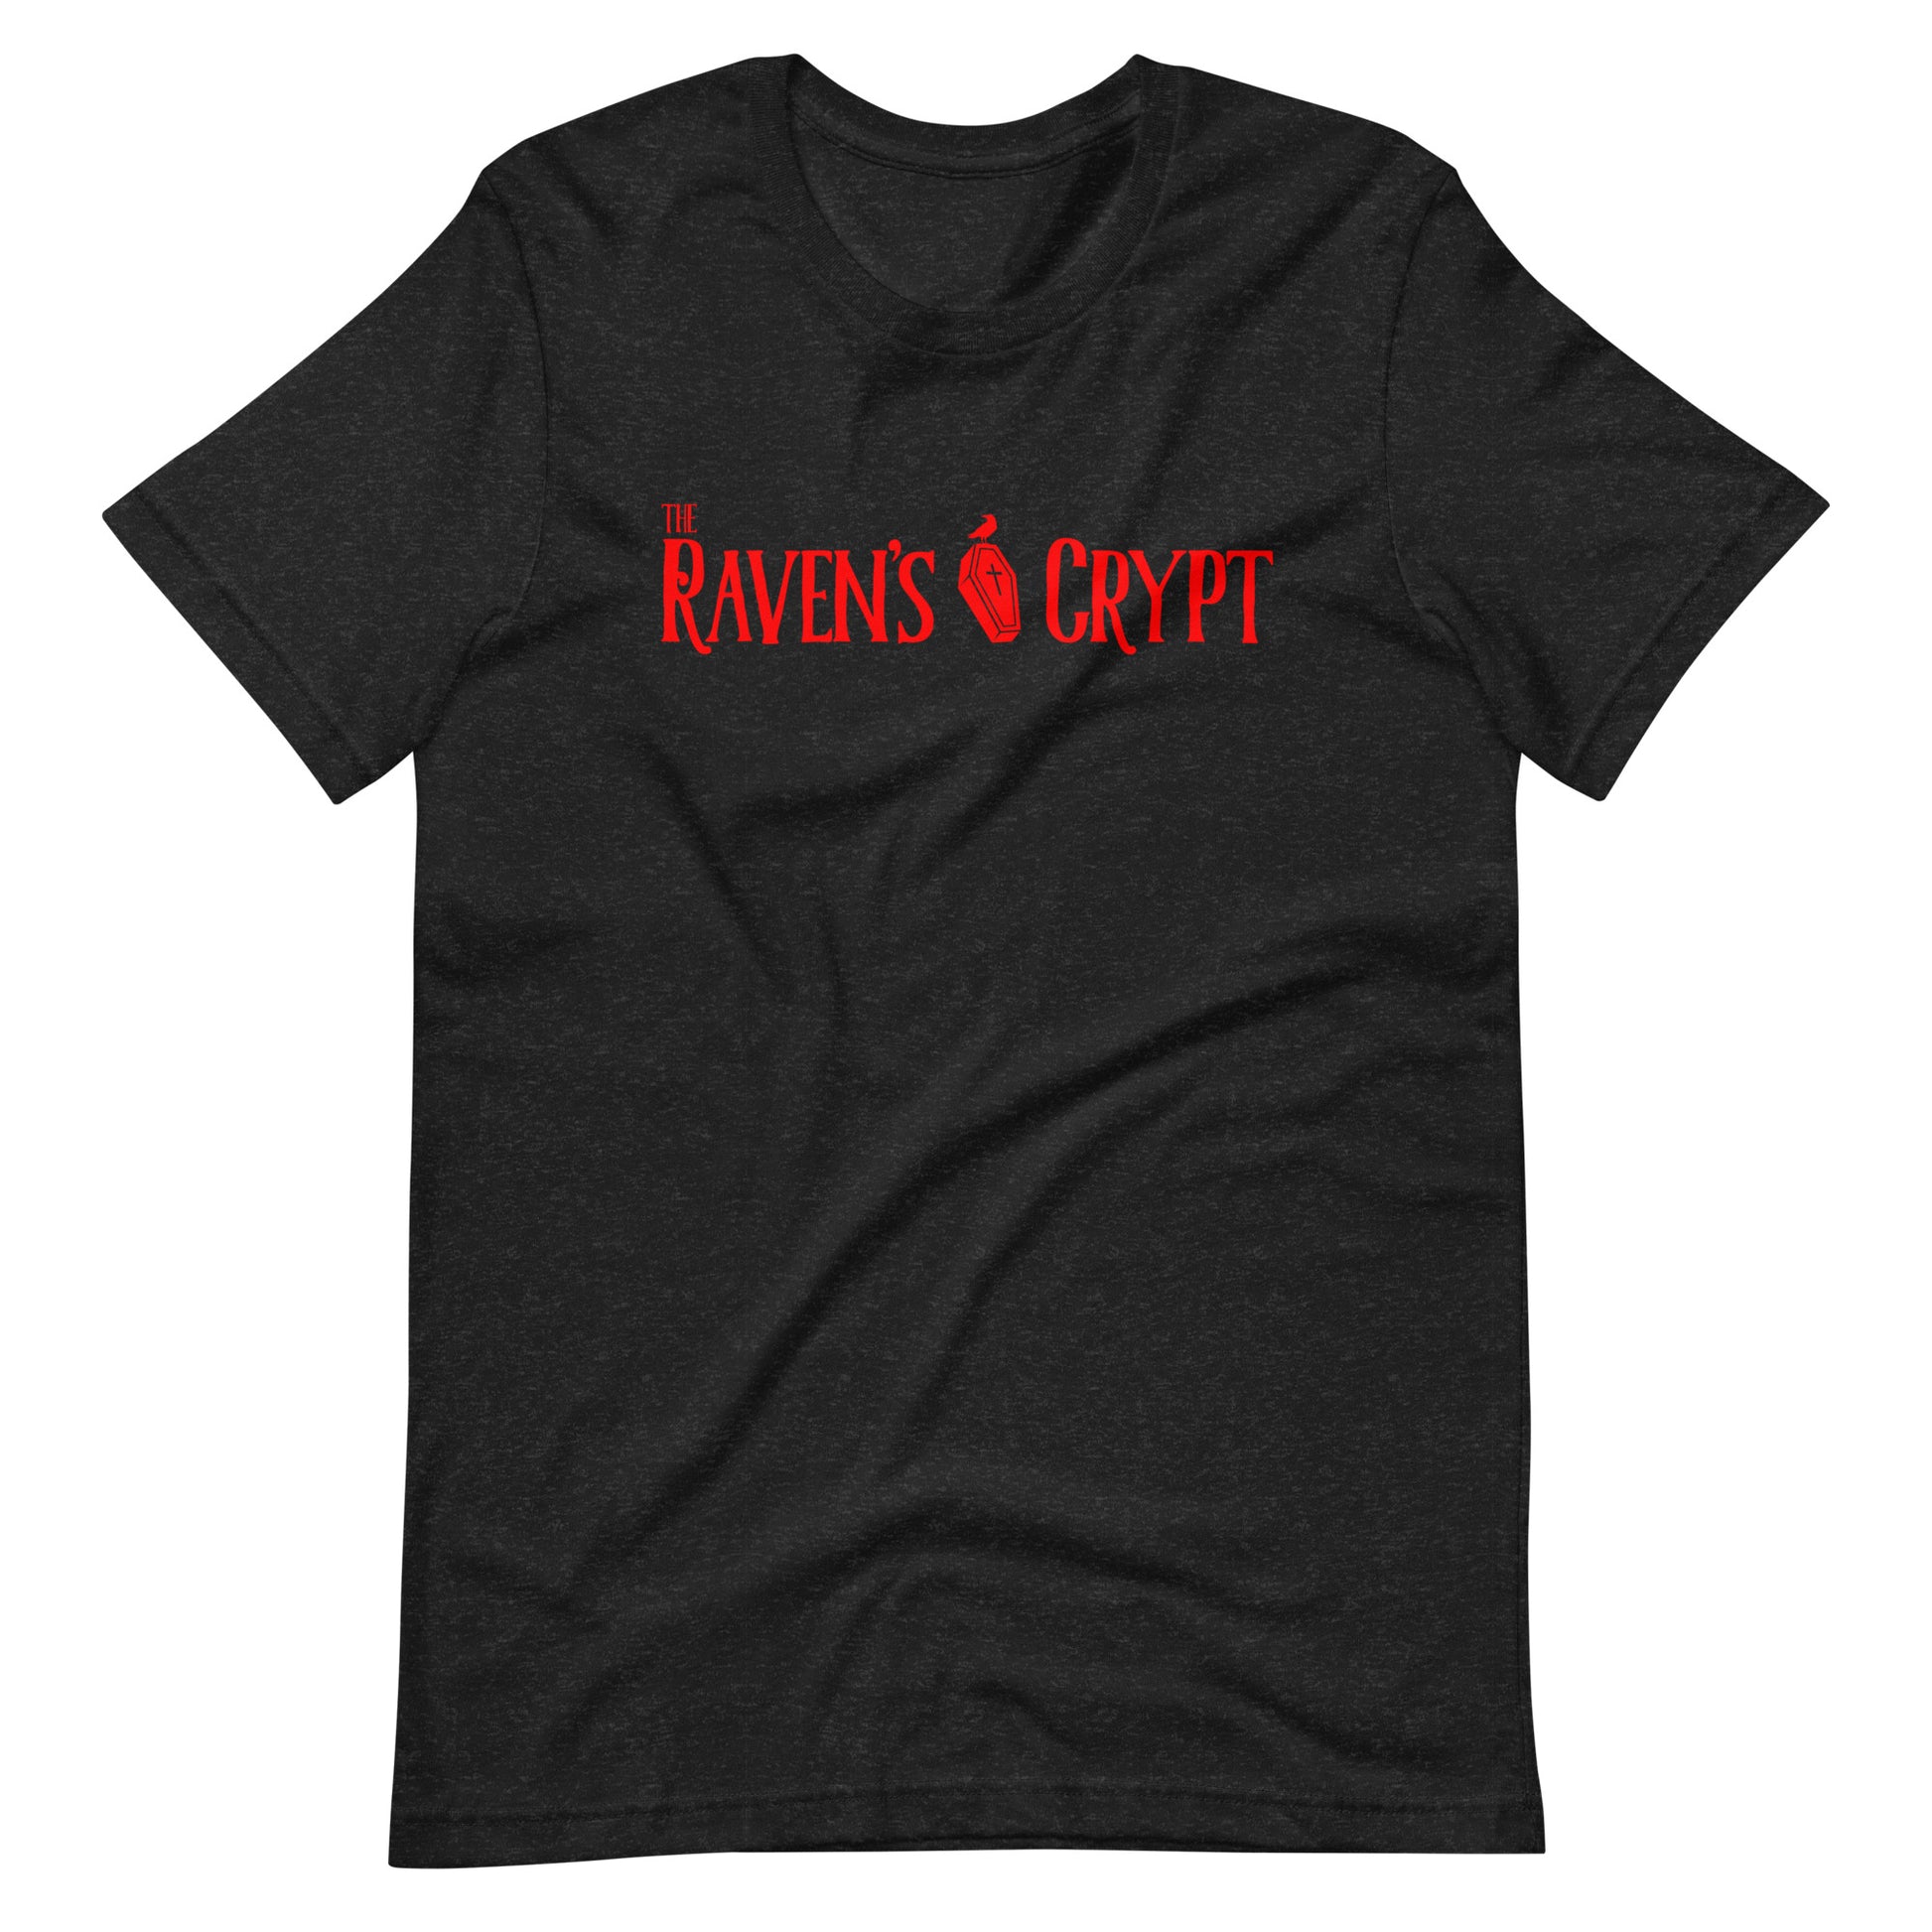 The Raven's Crypt Red Logo - Unisex t-shirt - Black Heather Front